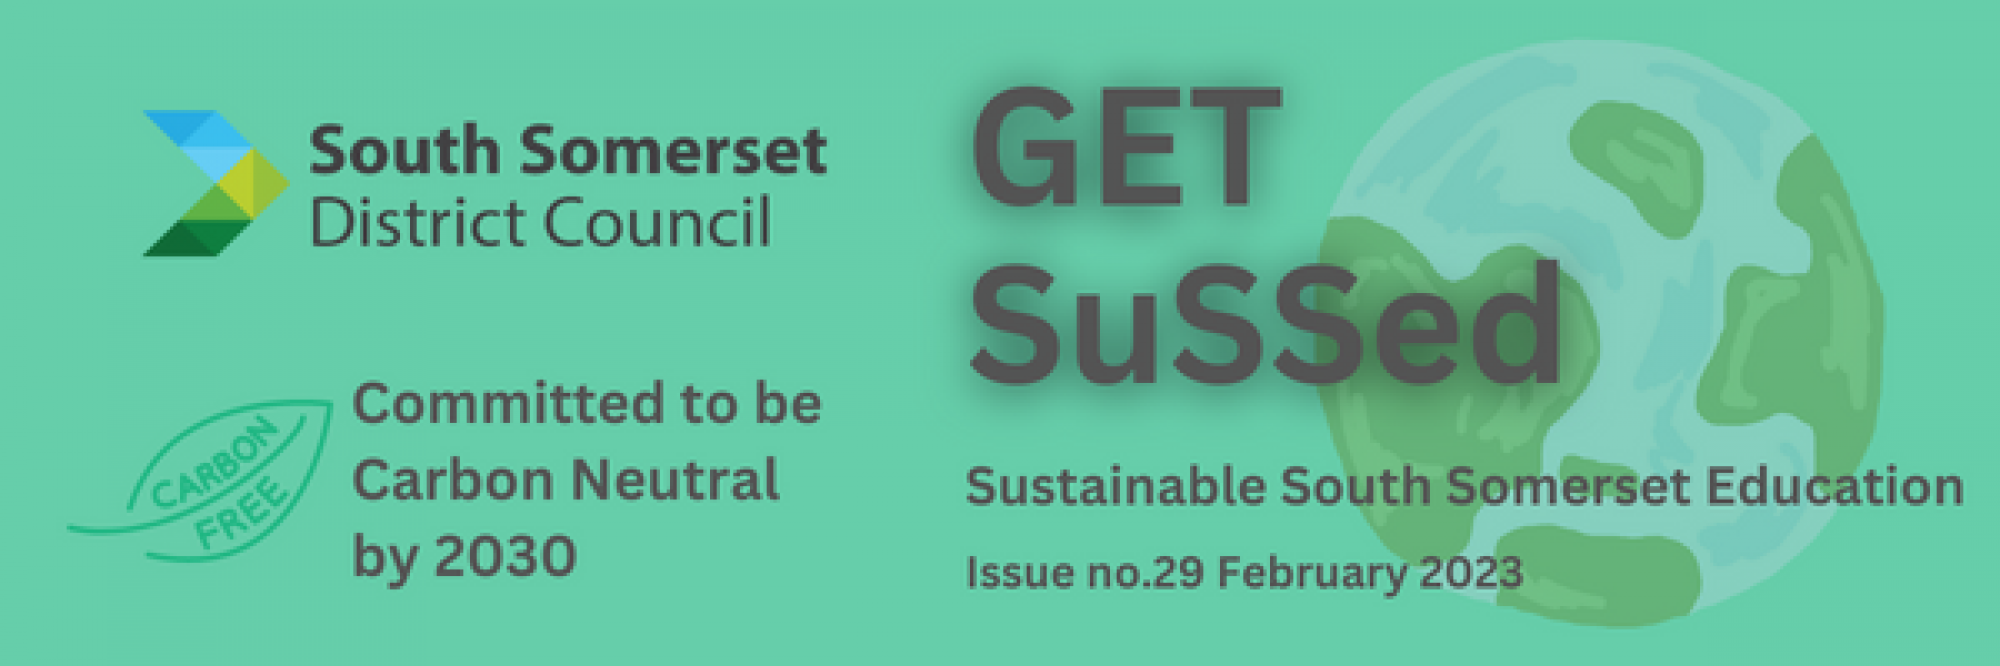 Get SuSSed from South Somerset District Council- Issue 29